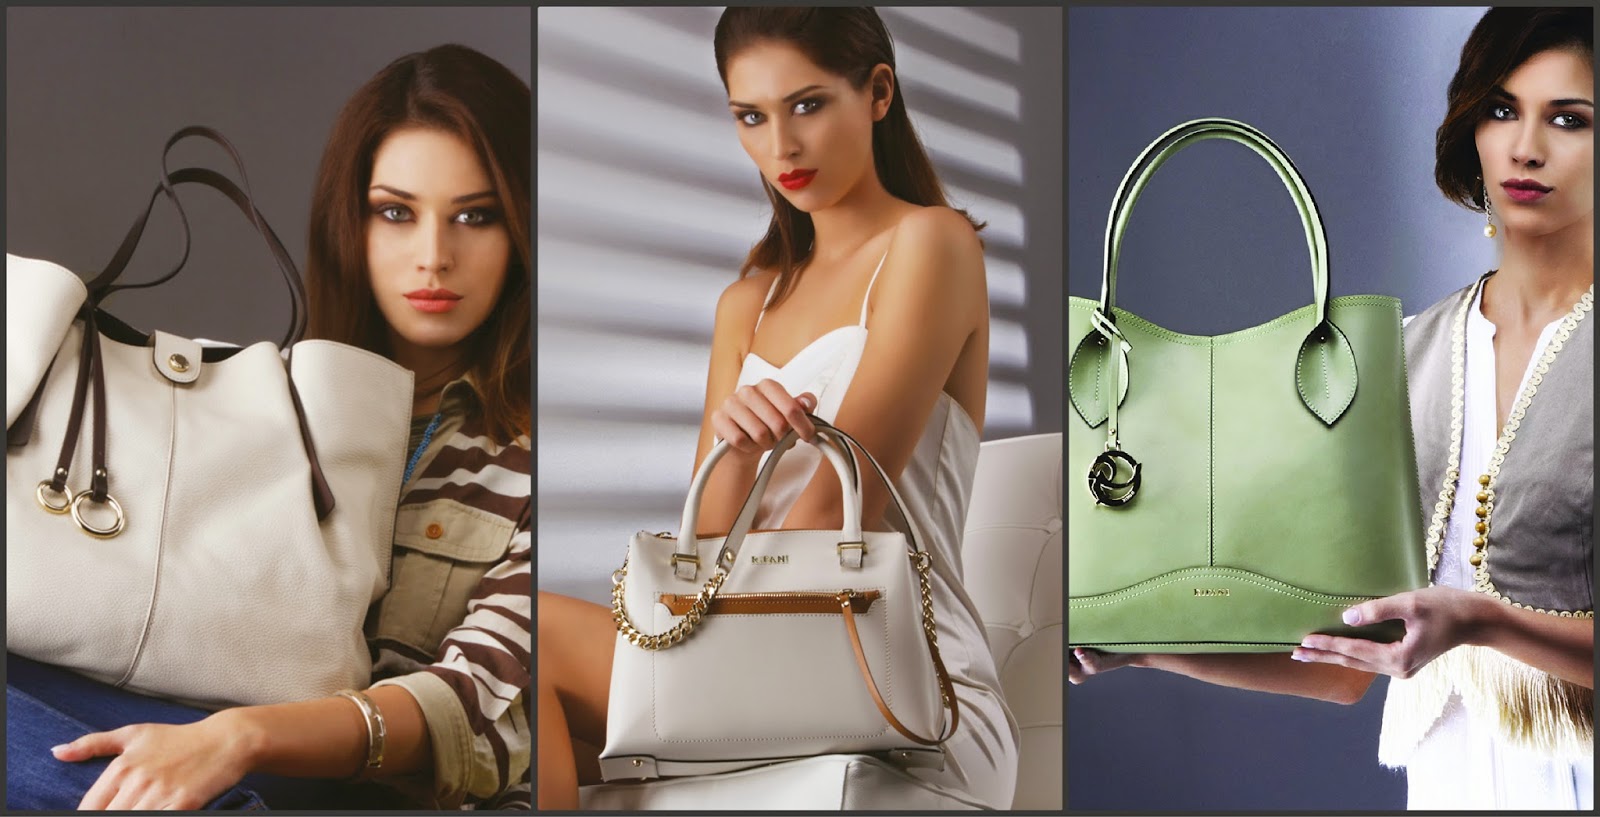 The Stylist Den: Ripani Bags. E-Commerce Launch&SS15 Collection